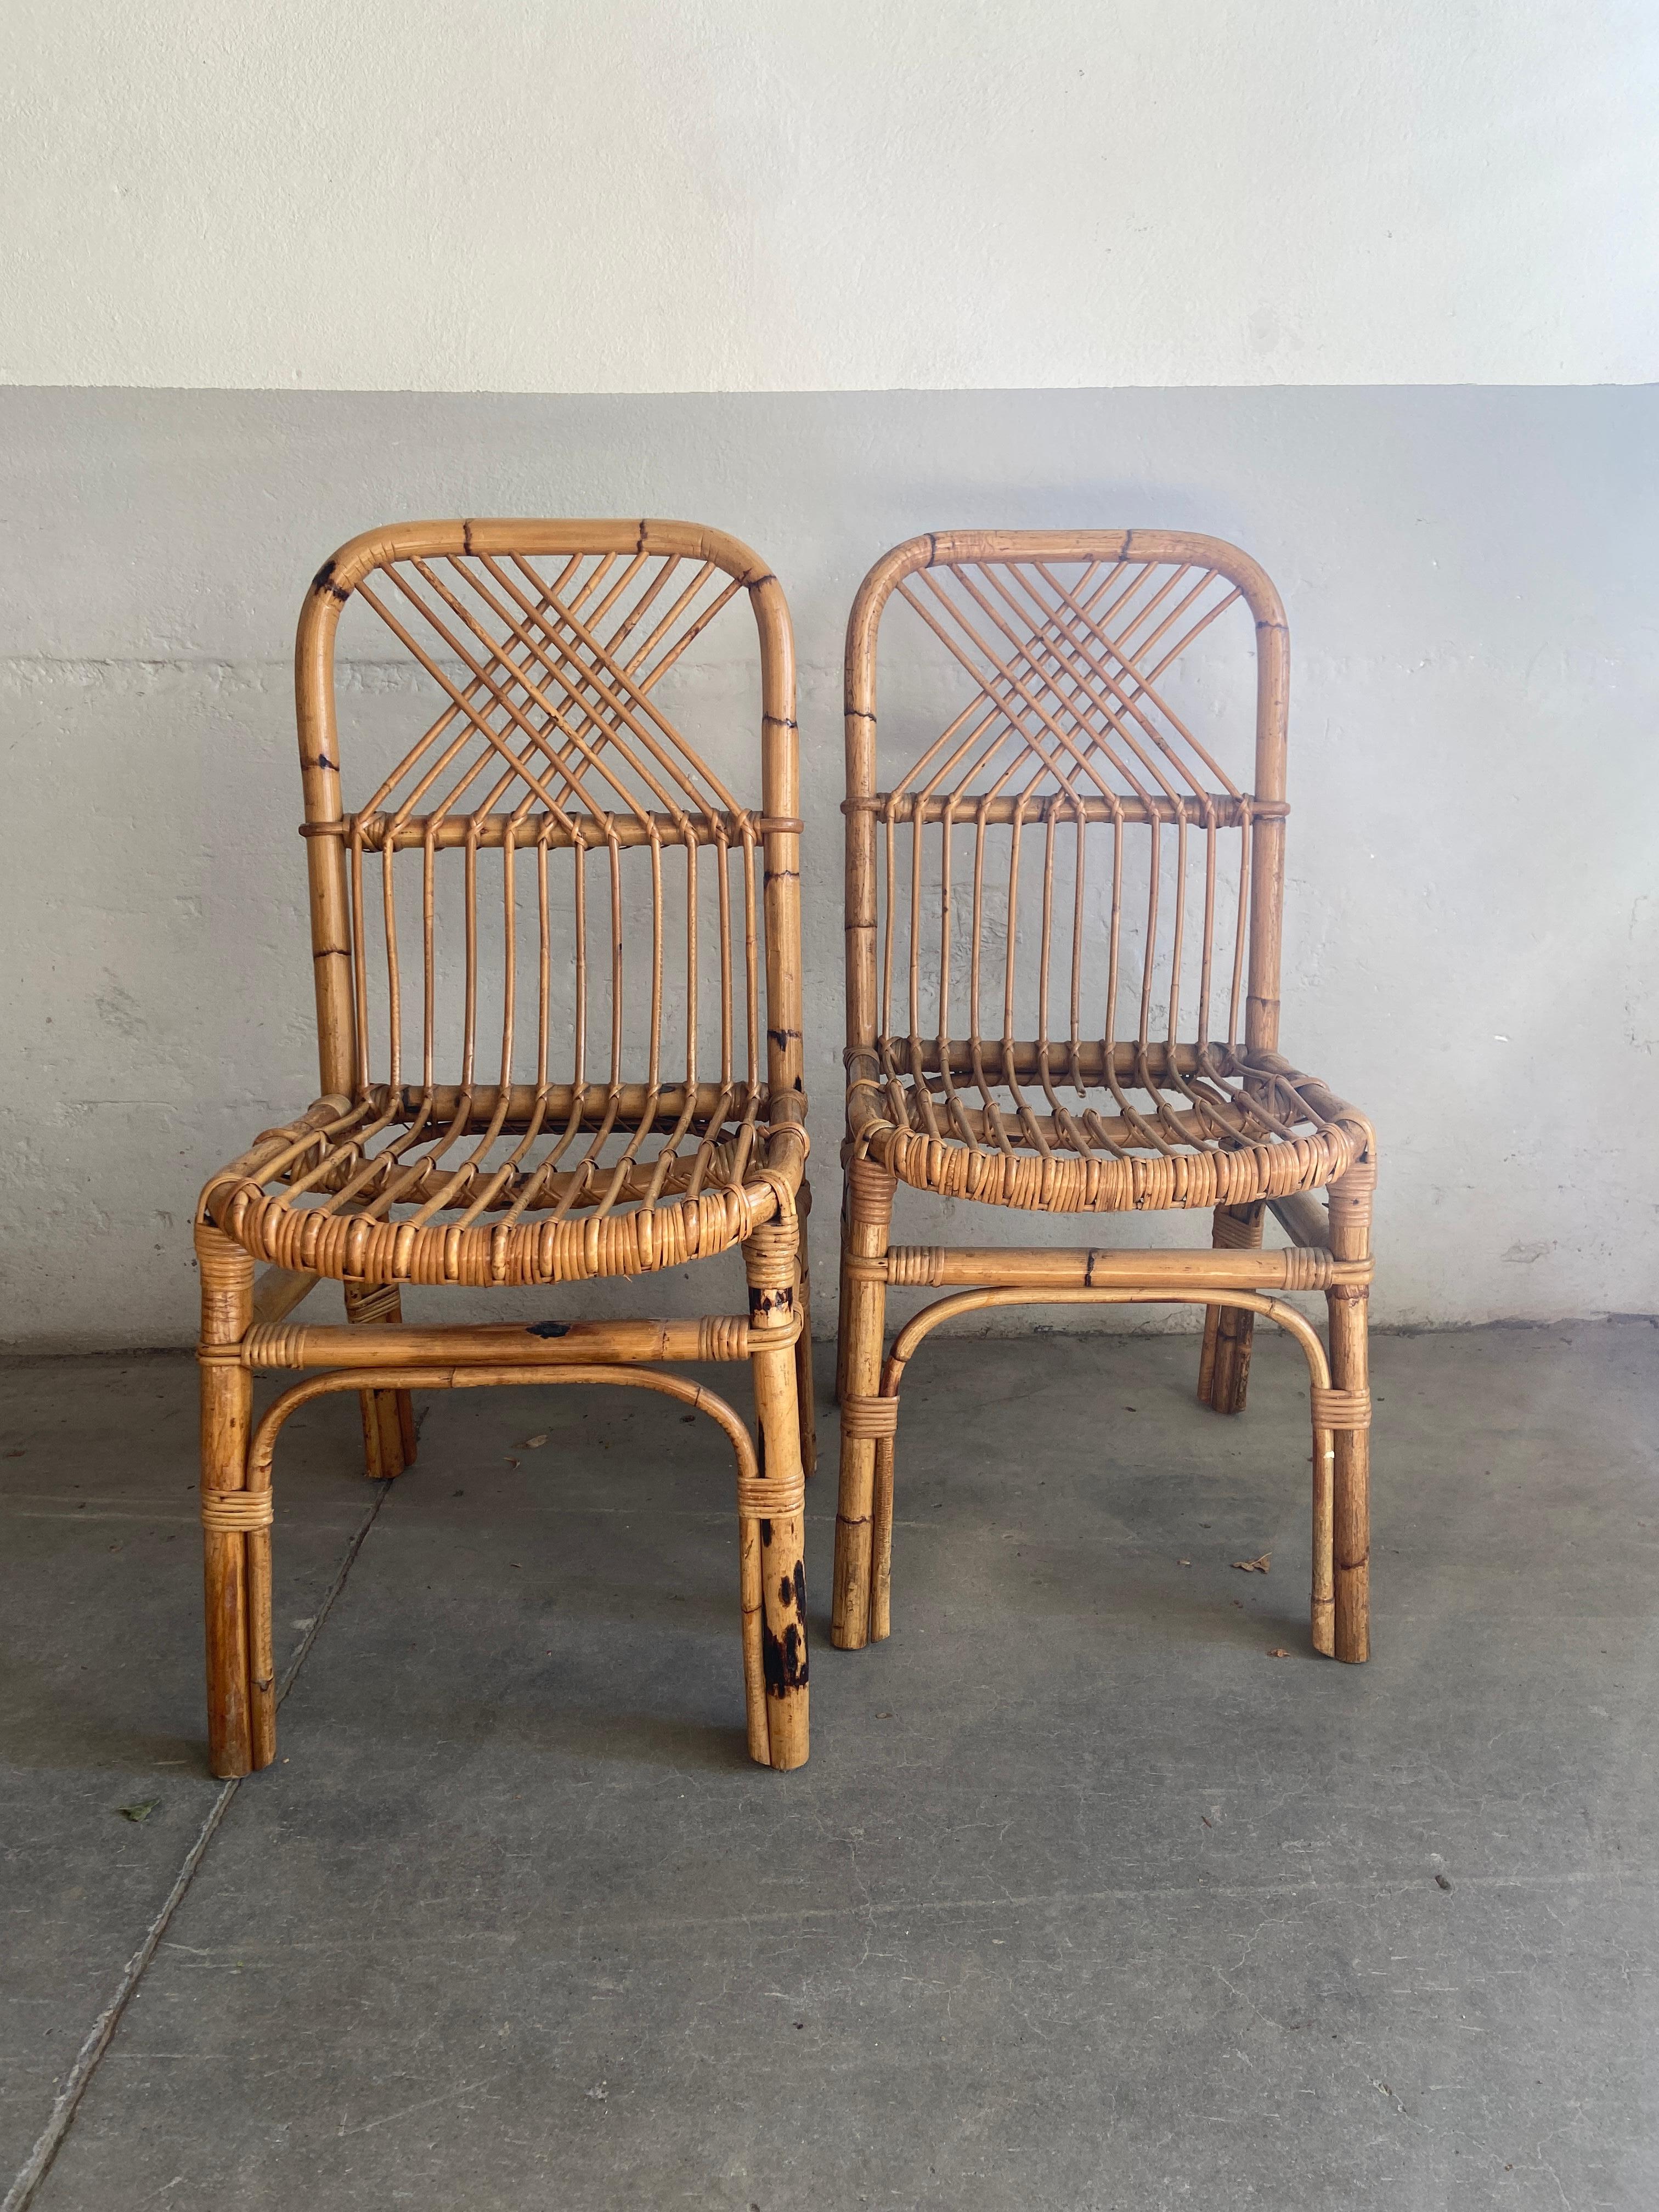 Mid-Century Modern Italian Pair of Bamboo and Rattan Chairs. 1970s
They can become a set with their table as shown in the photos.
The chairs are in really good vintage conditions. Ware consist with age and use.